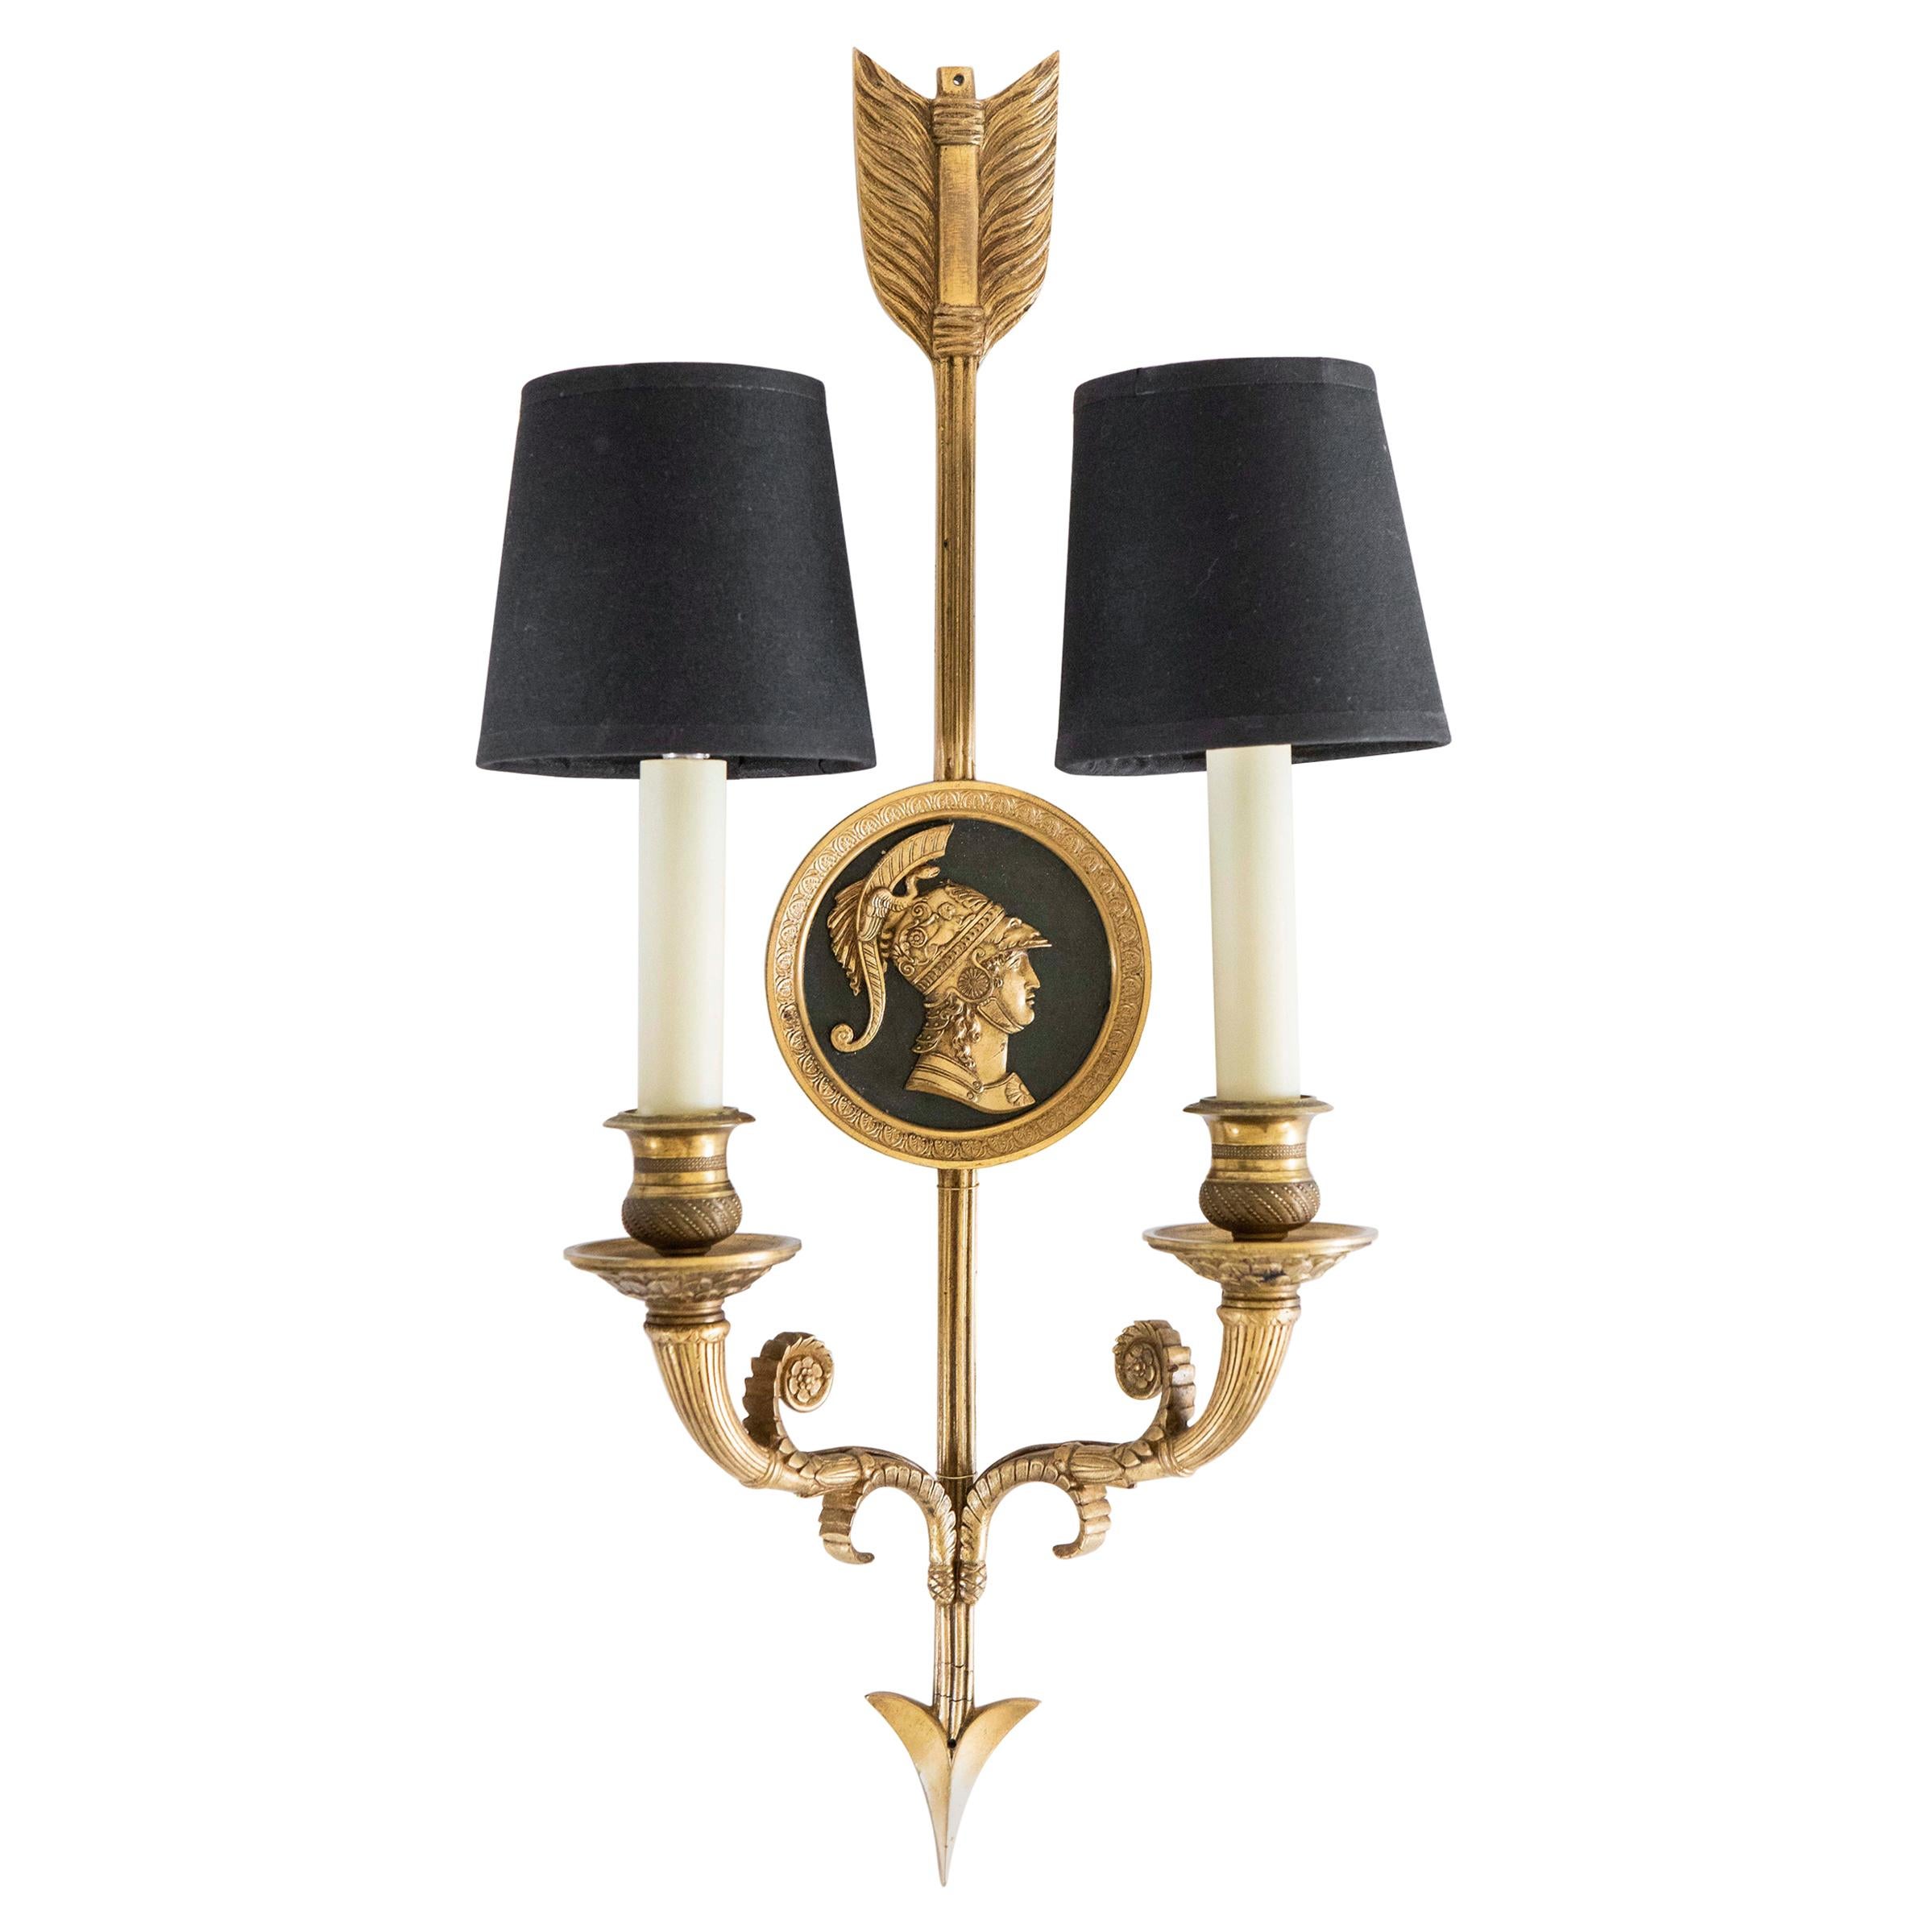 Pair of 1940s French Empire Arrow Sconces with Black Linen Shades